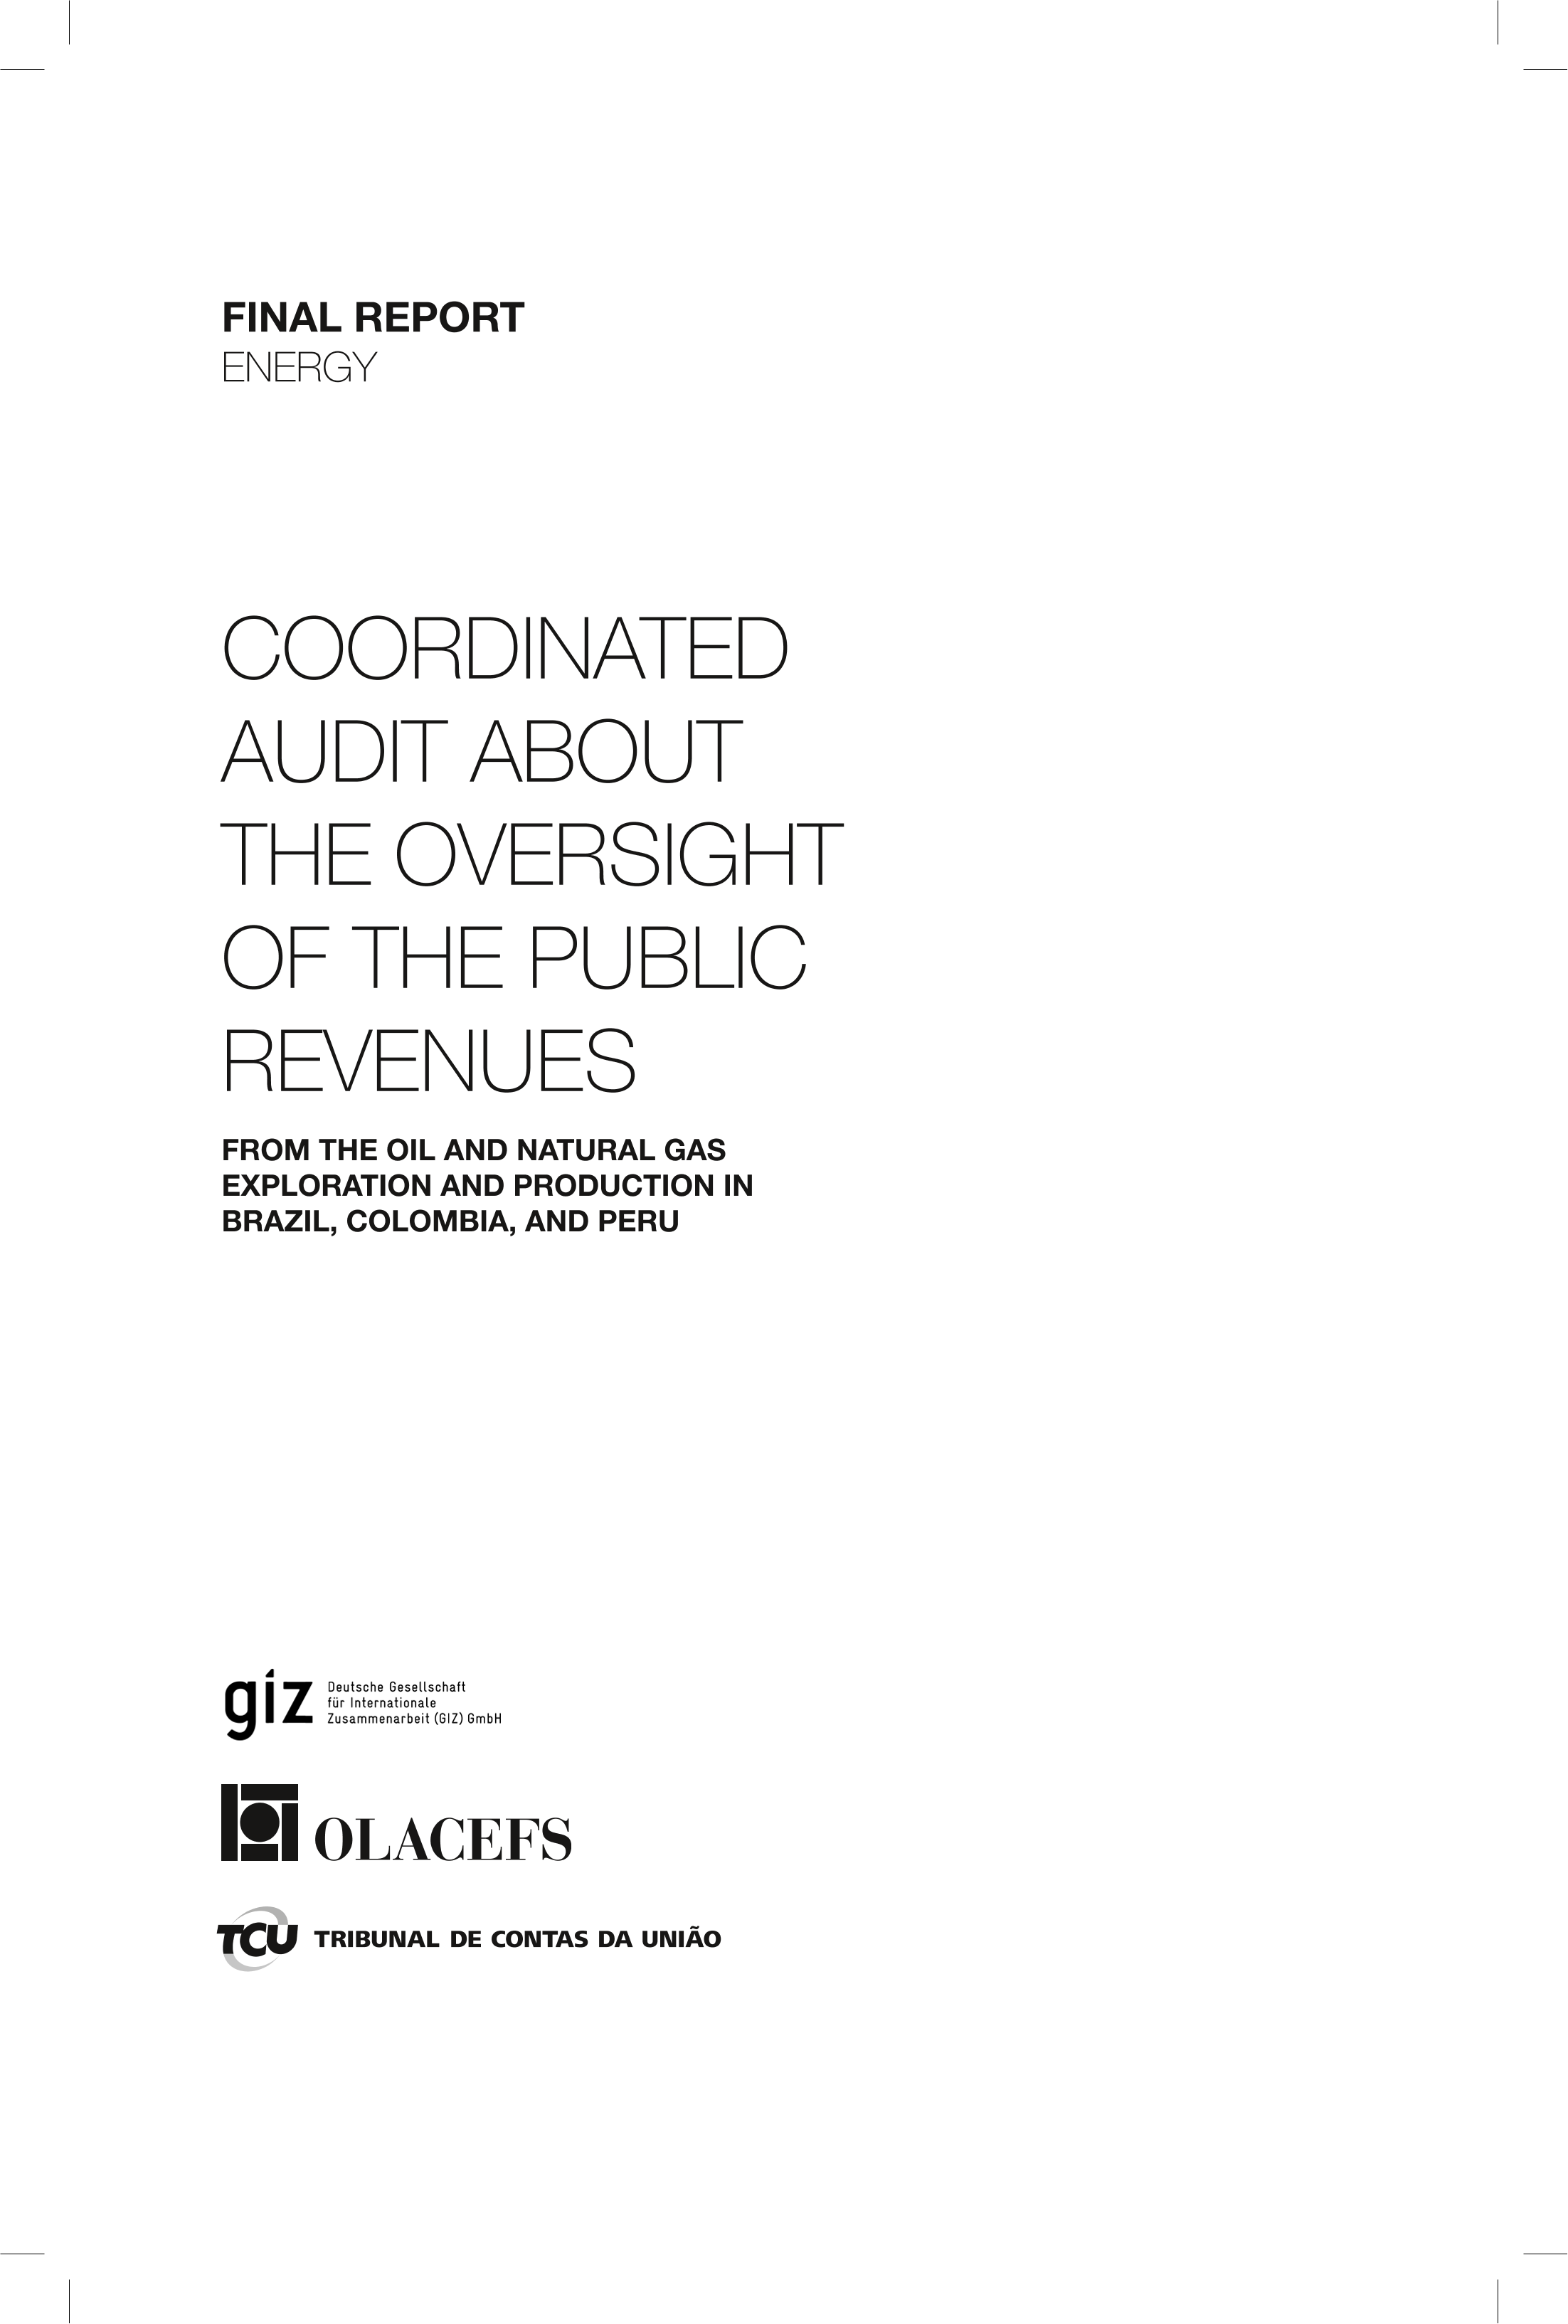 cooperative audit - oversight of public revenues.png